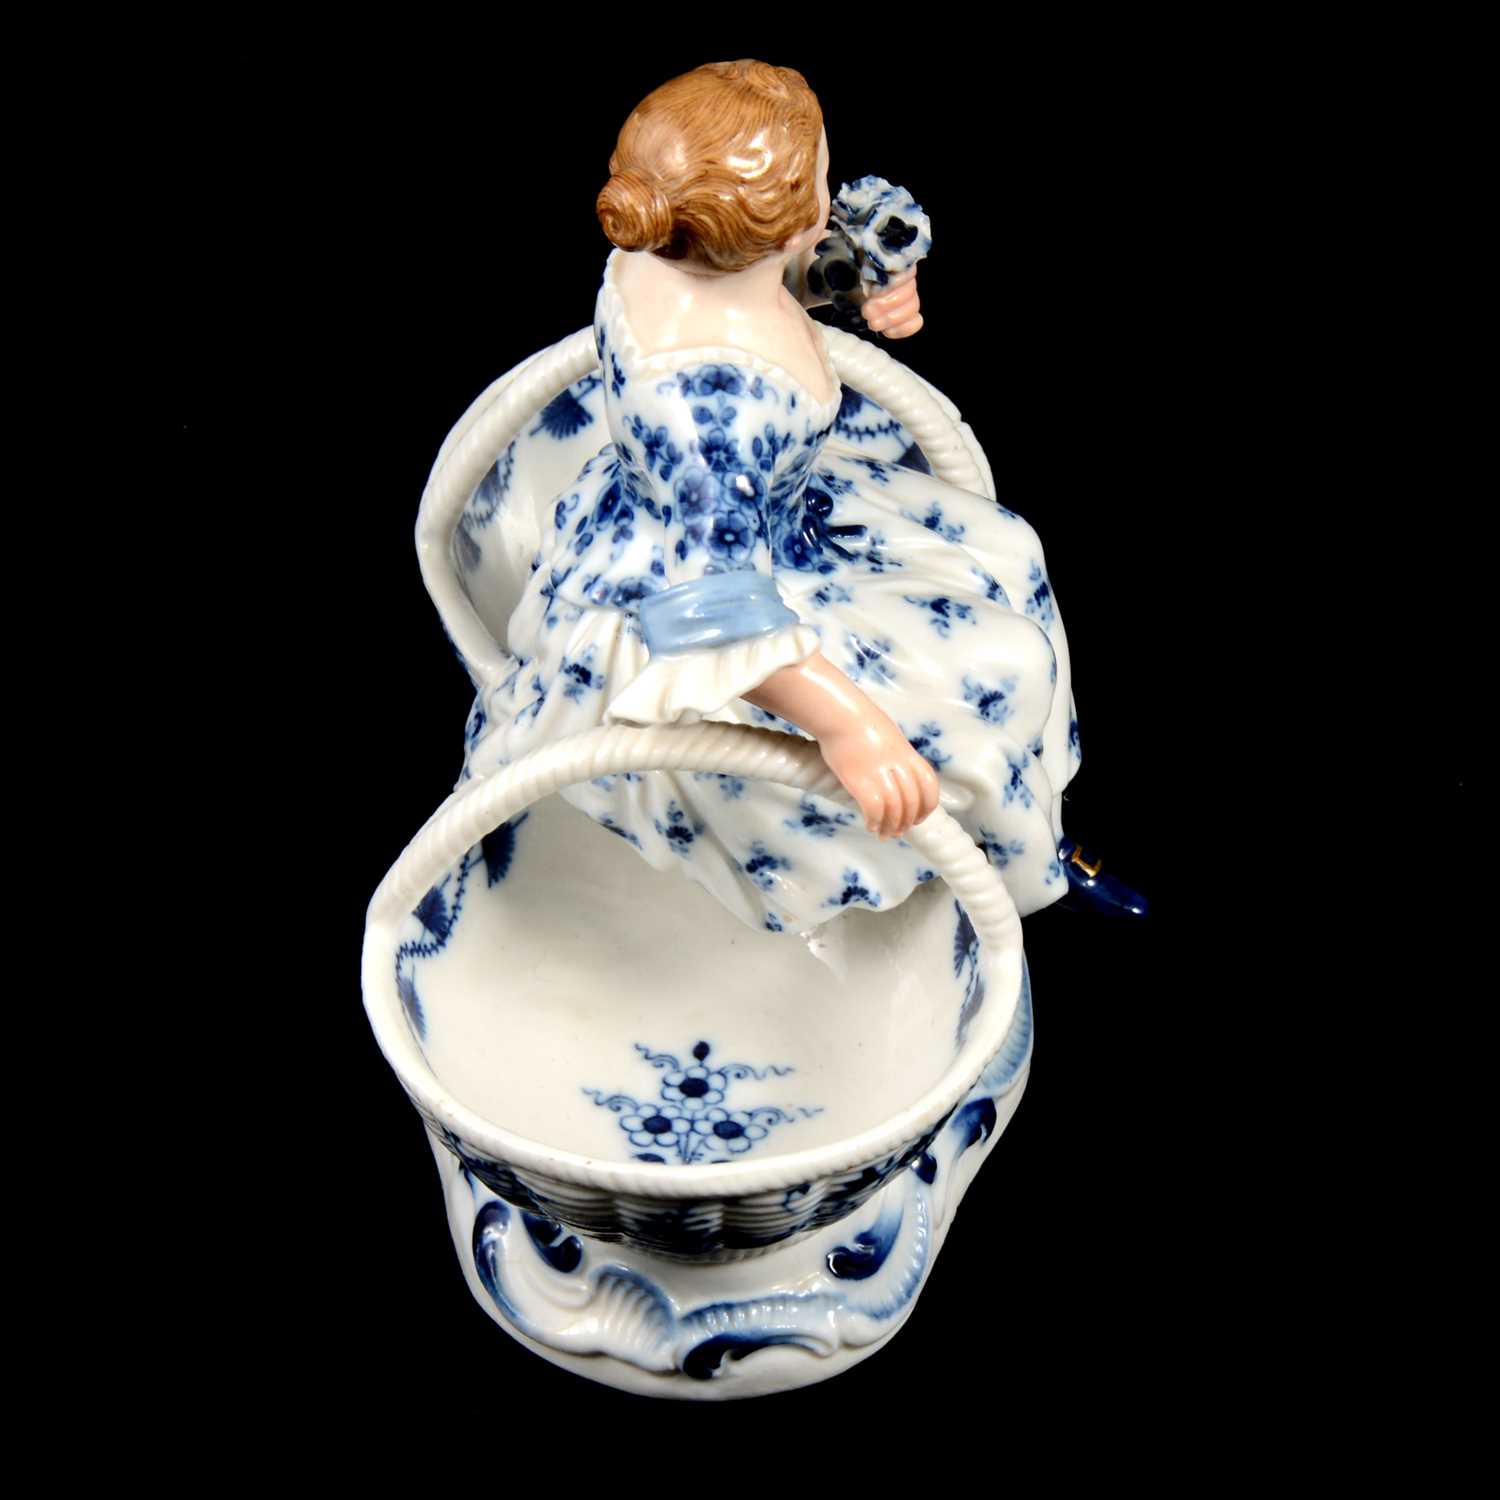 Near pair of Meissen porcelain figural table salts, late 19th / early 20th century - Image 11 of 21